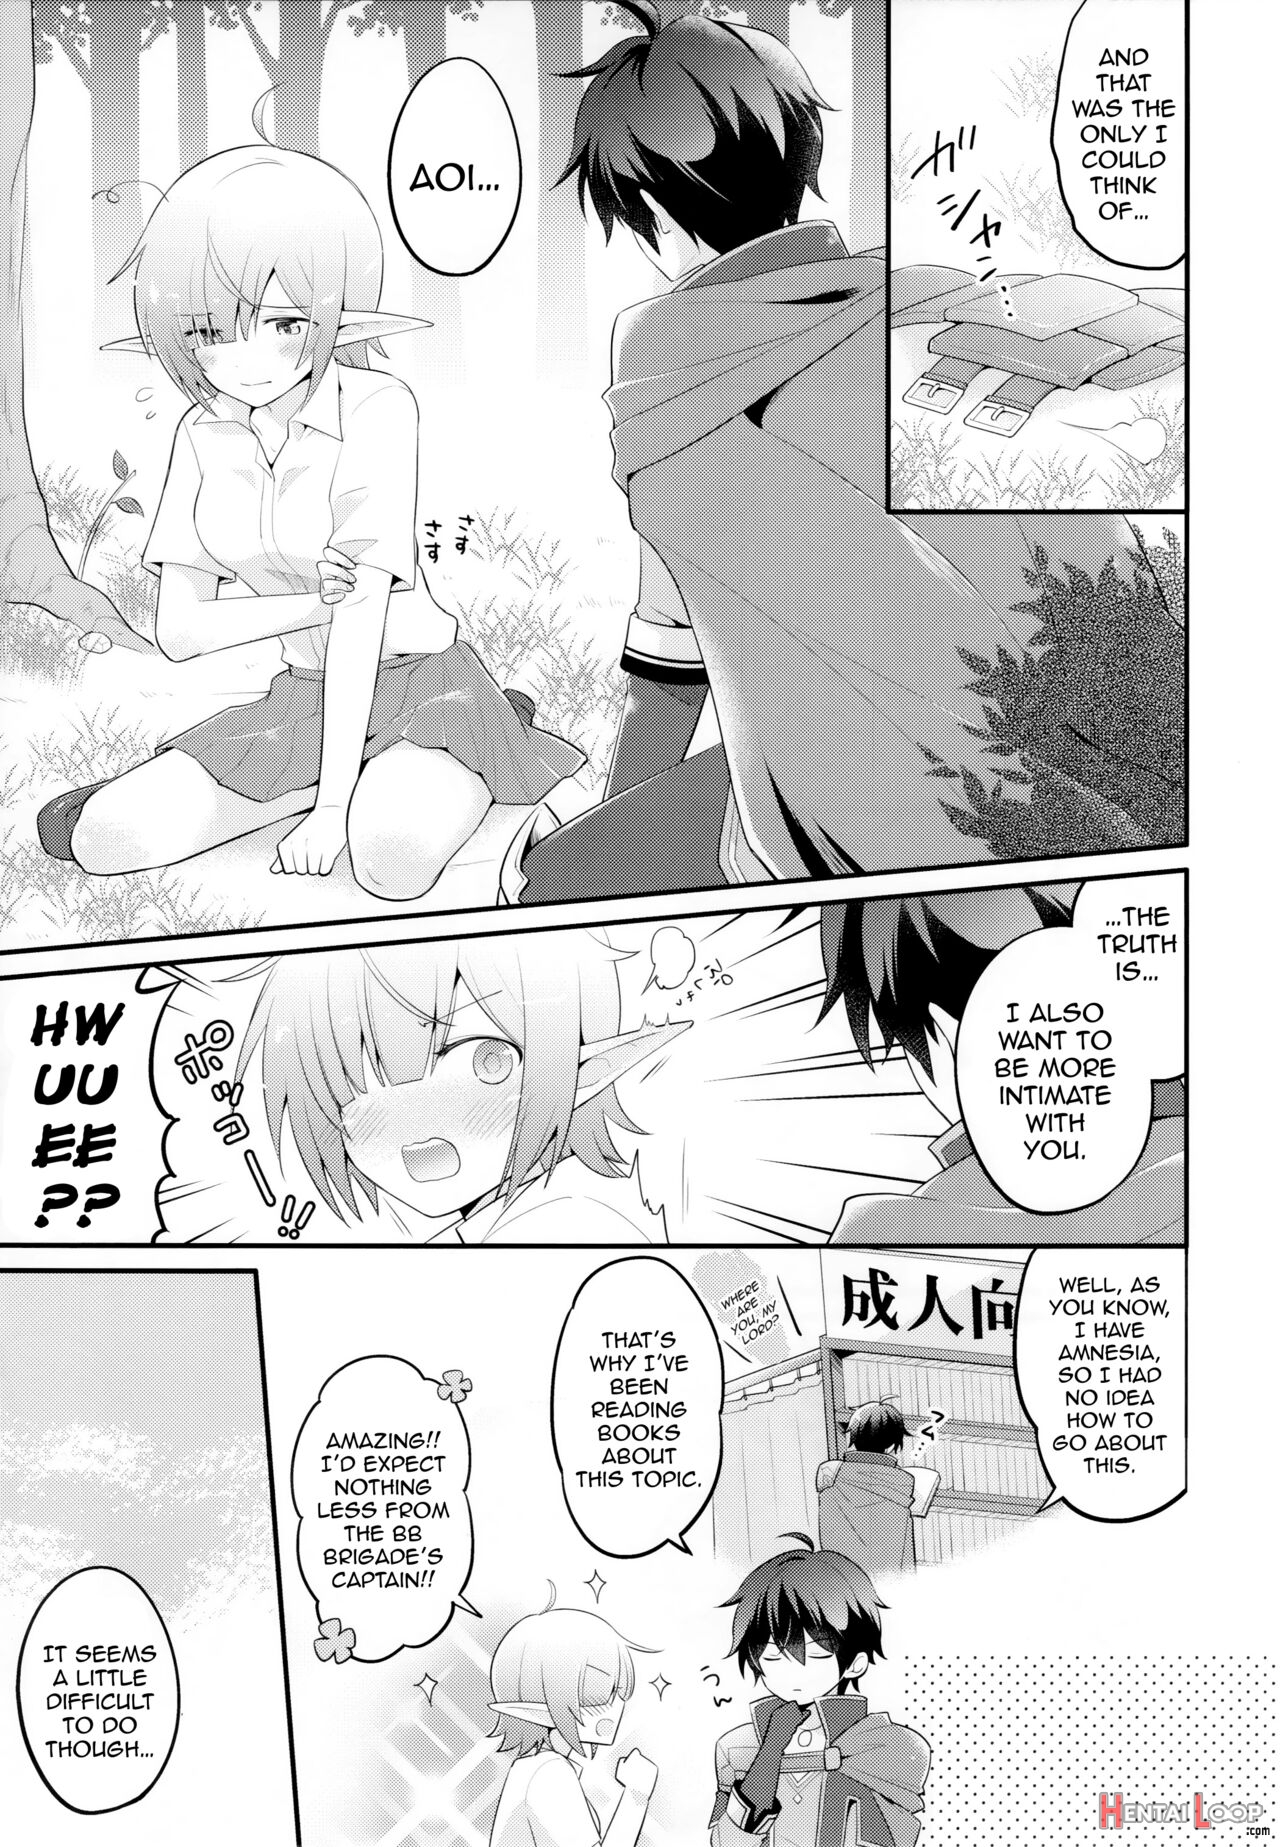 Aoi's All-out Friend Making Strategy page 12